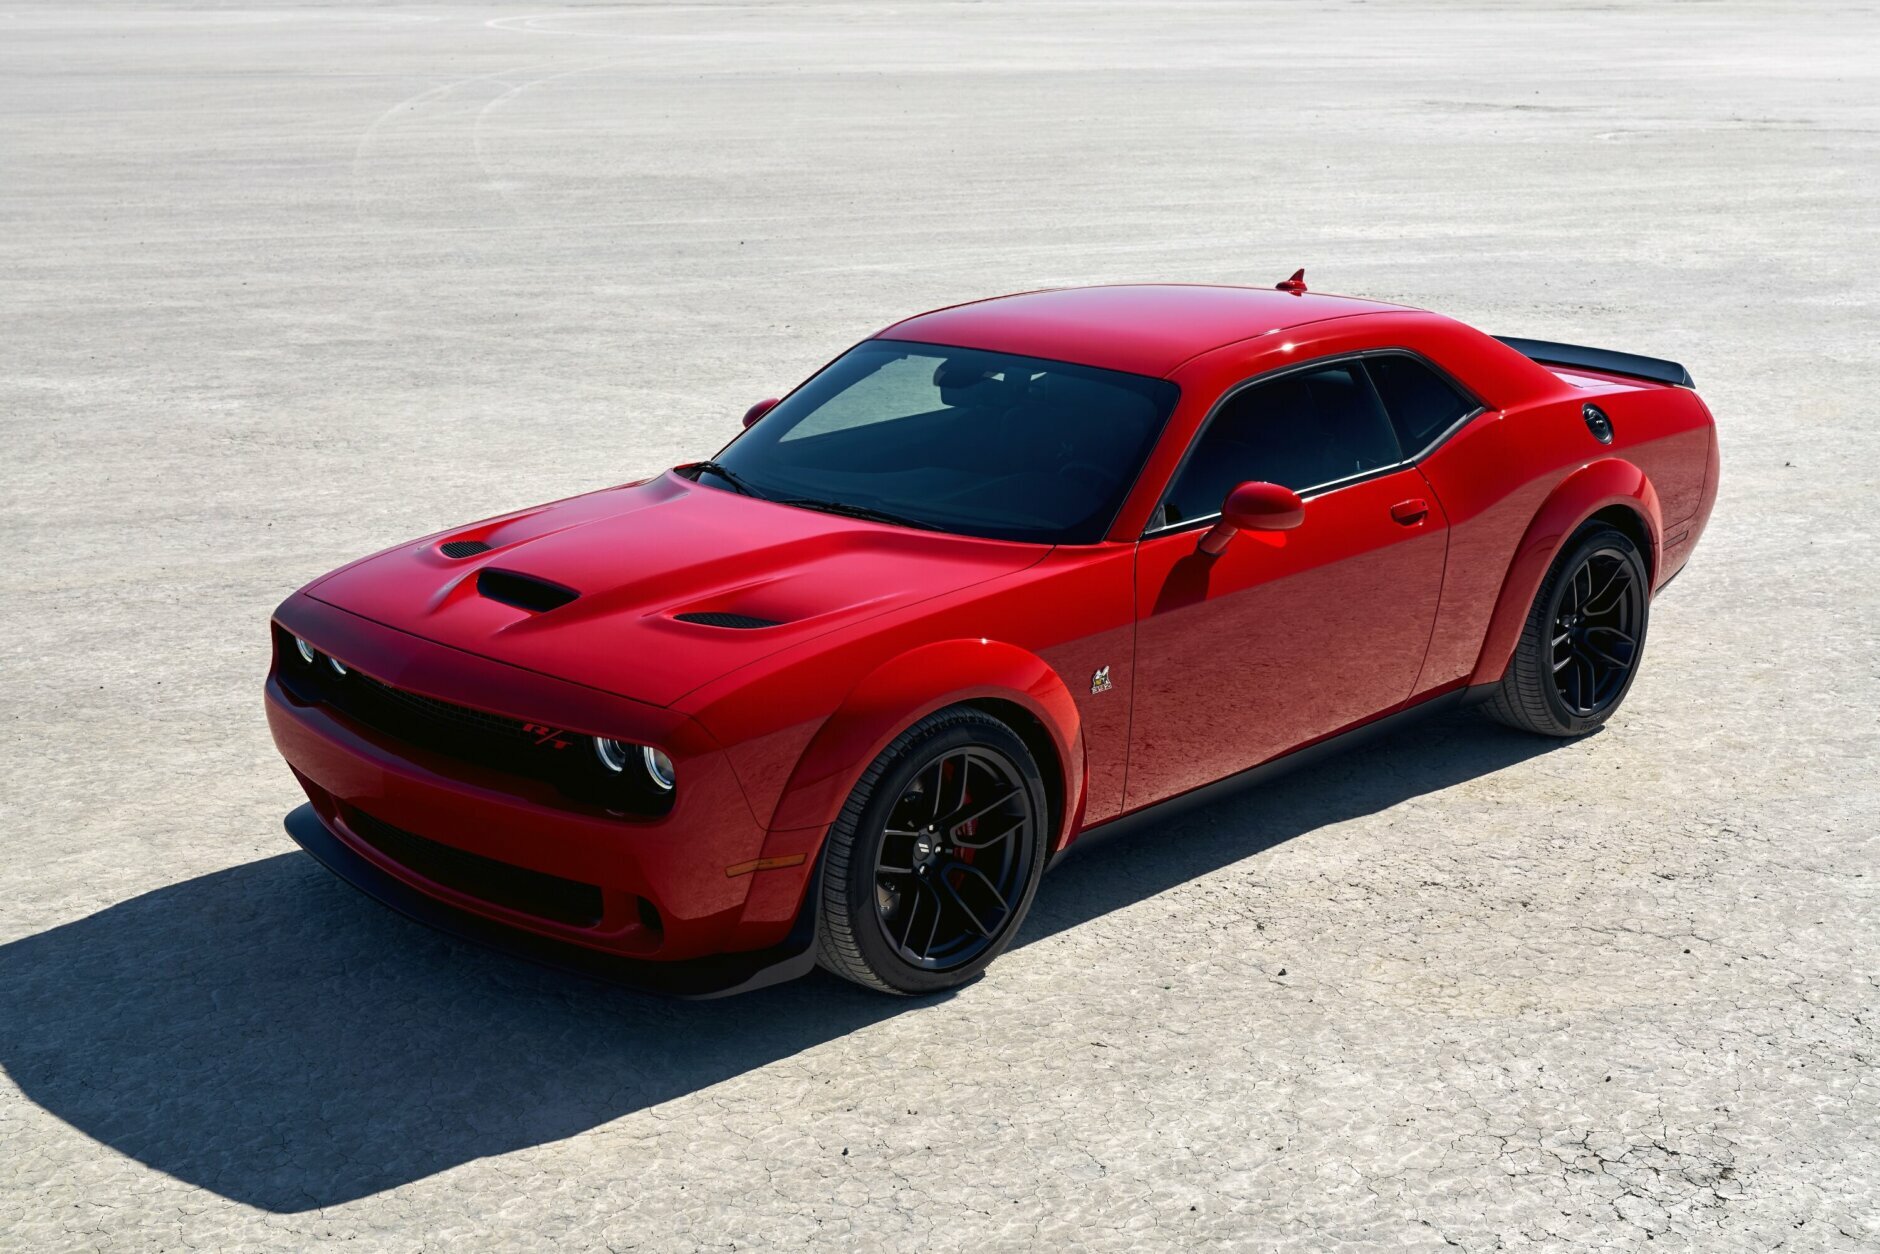 <h3><strong>2020 Dodge Challenger</strong></h3>
<p><strong>Purchase Deal: </strong>Up to $7,970 cash back</p>
